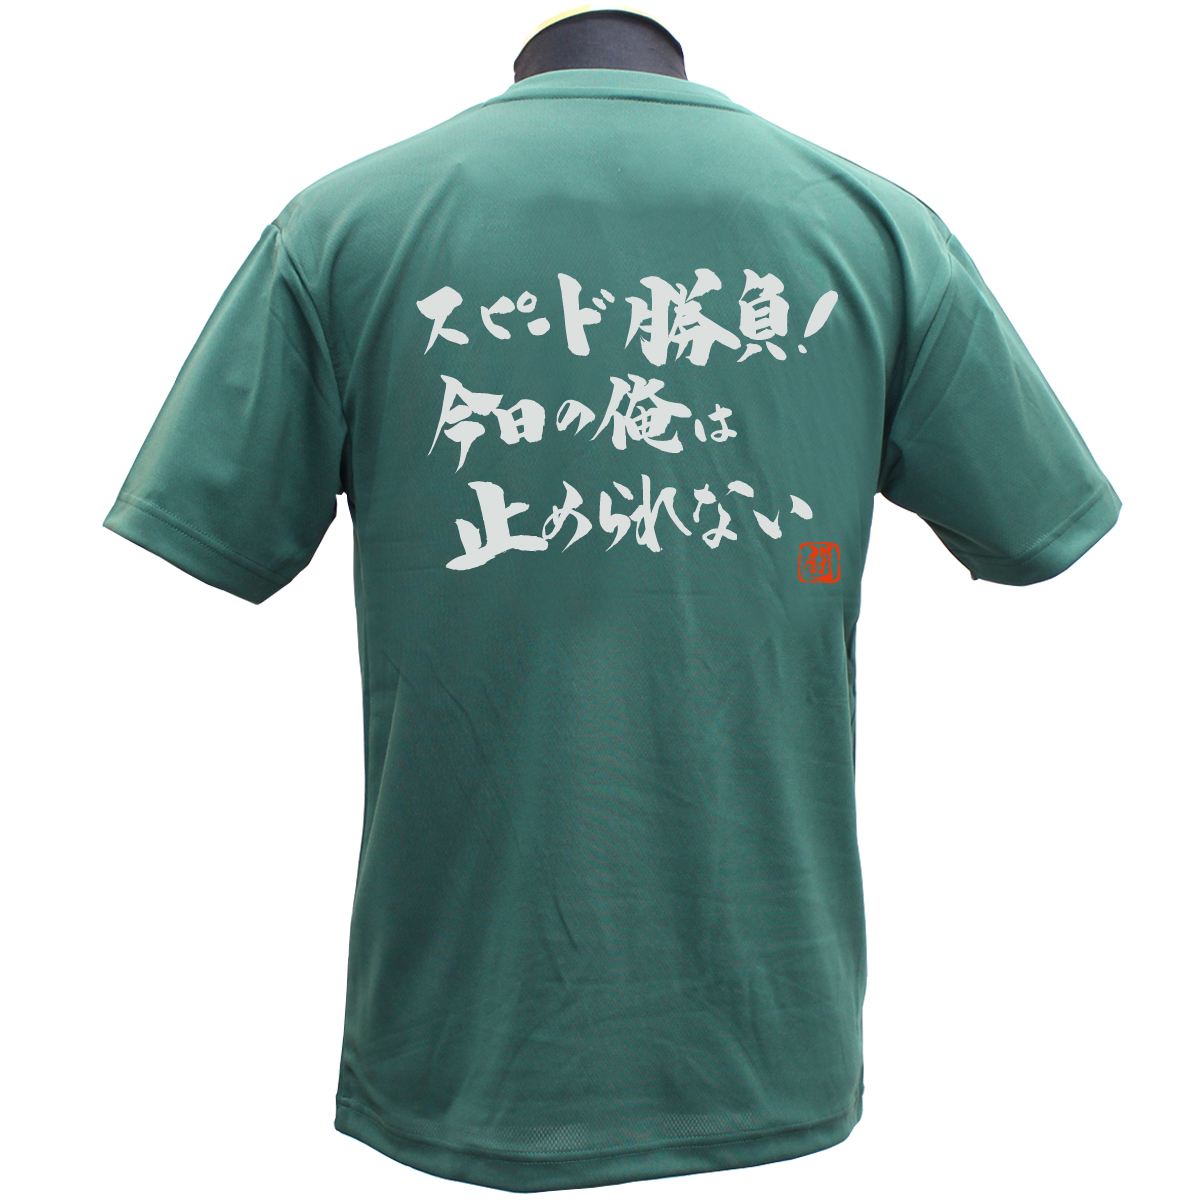 RUGBY PRO SHOP Ryu / スピード勝負 ポリTシャツ